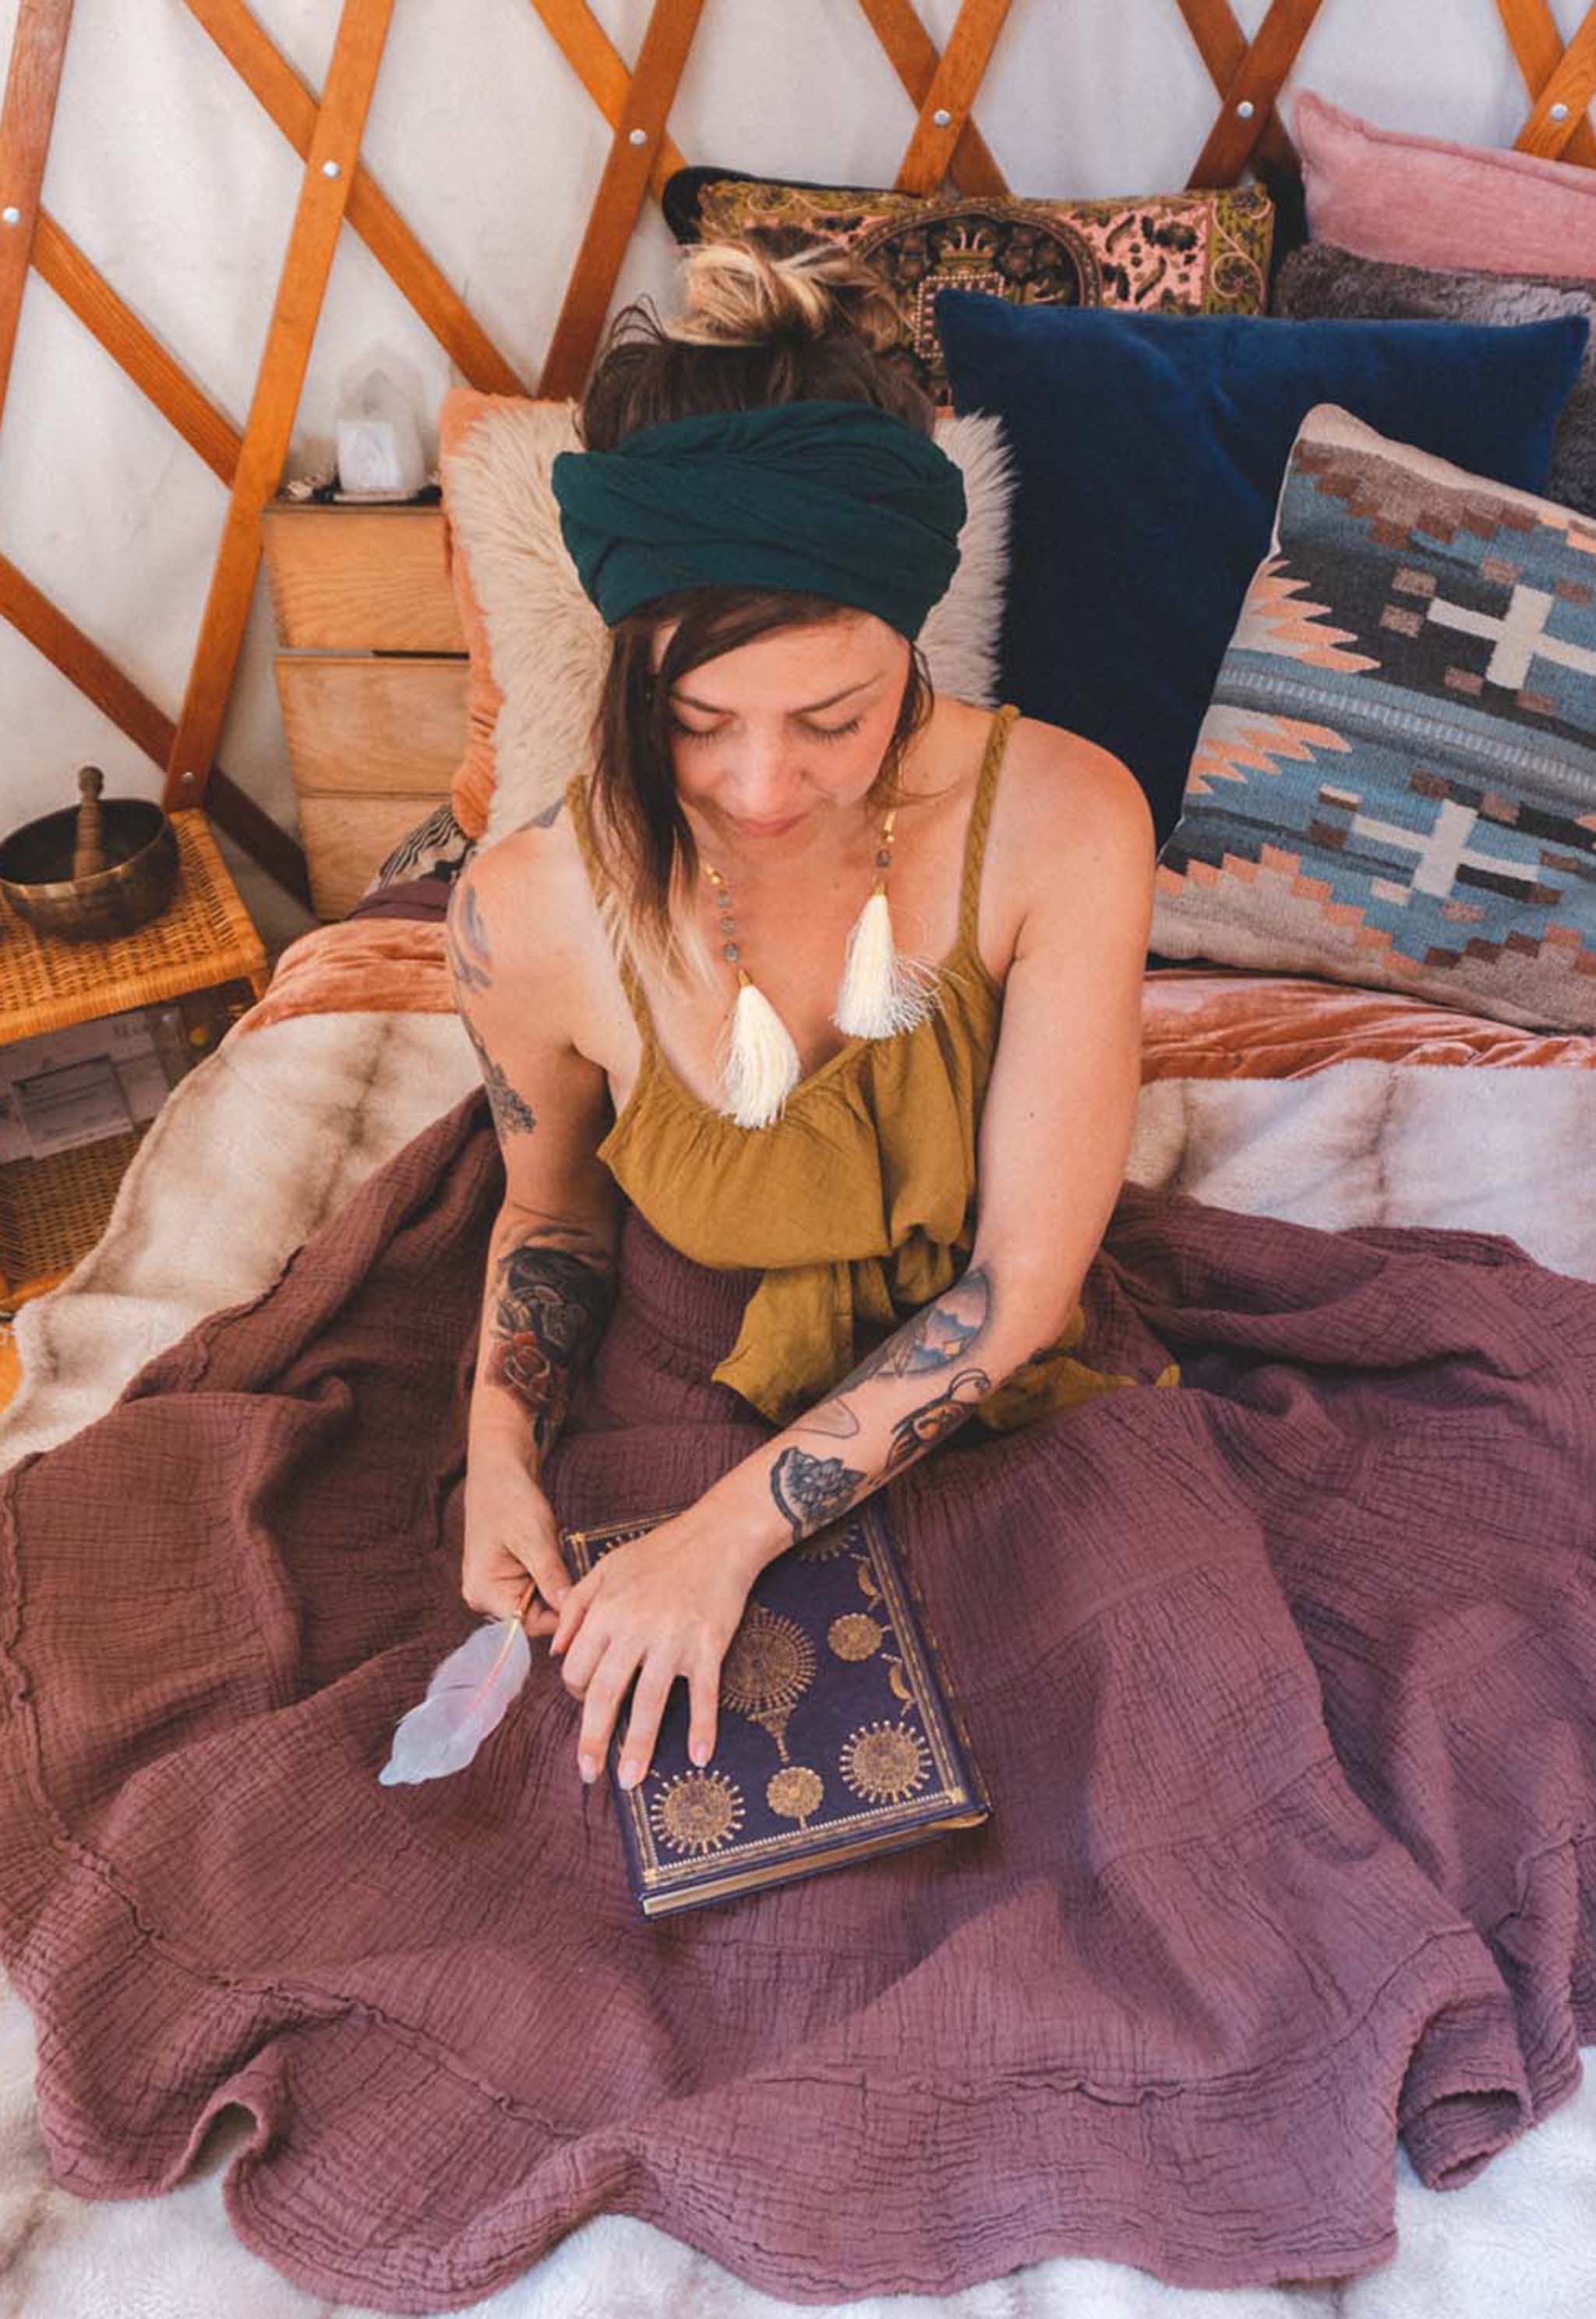 Woman sitting on bed with colorful pillows wearing full, layered purple skirt, gold tank top and green head wrap. She had a book on her lap.